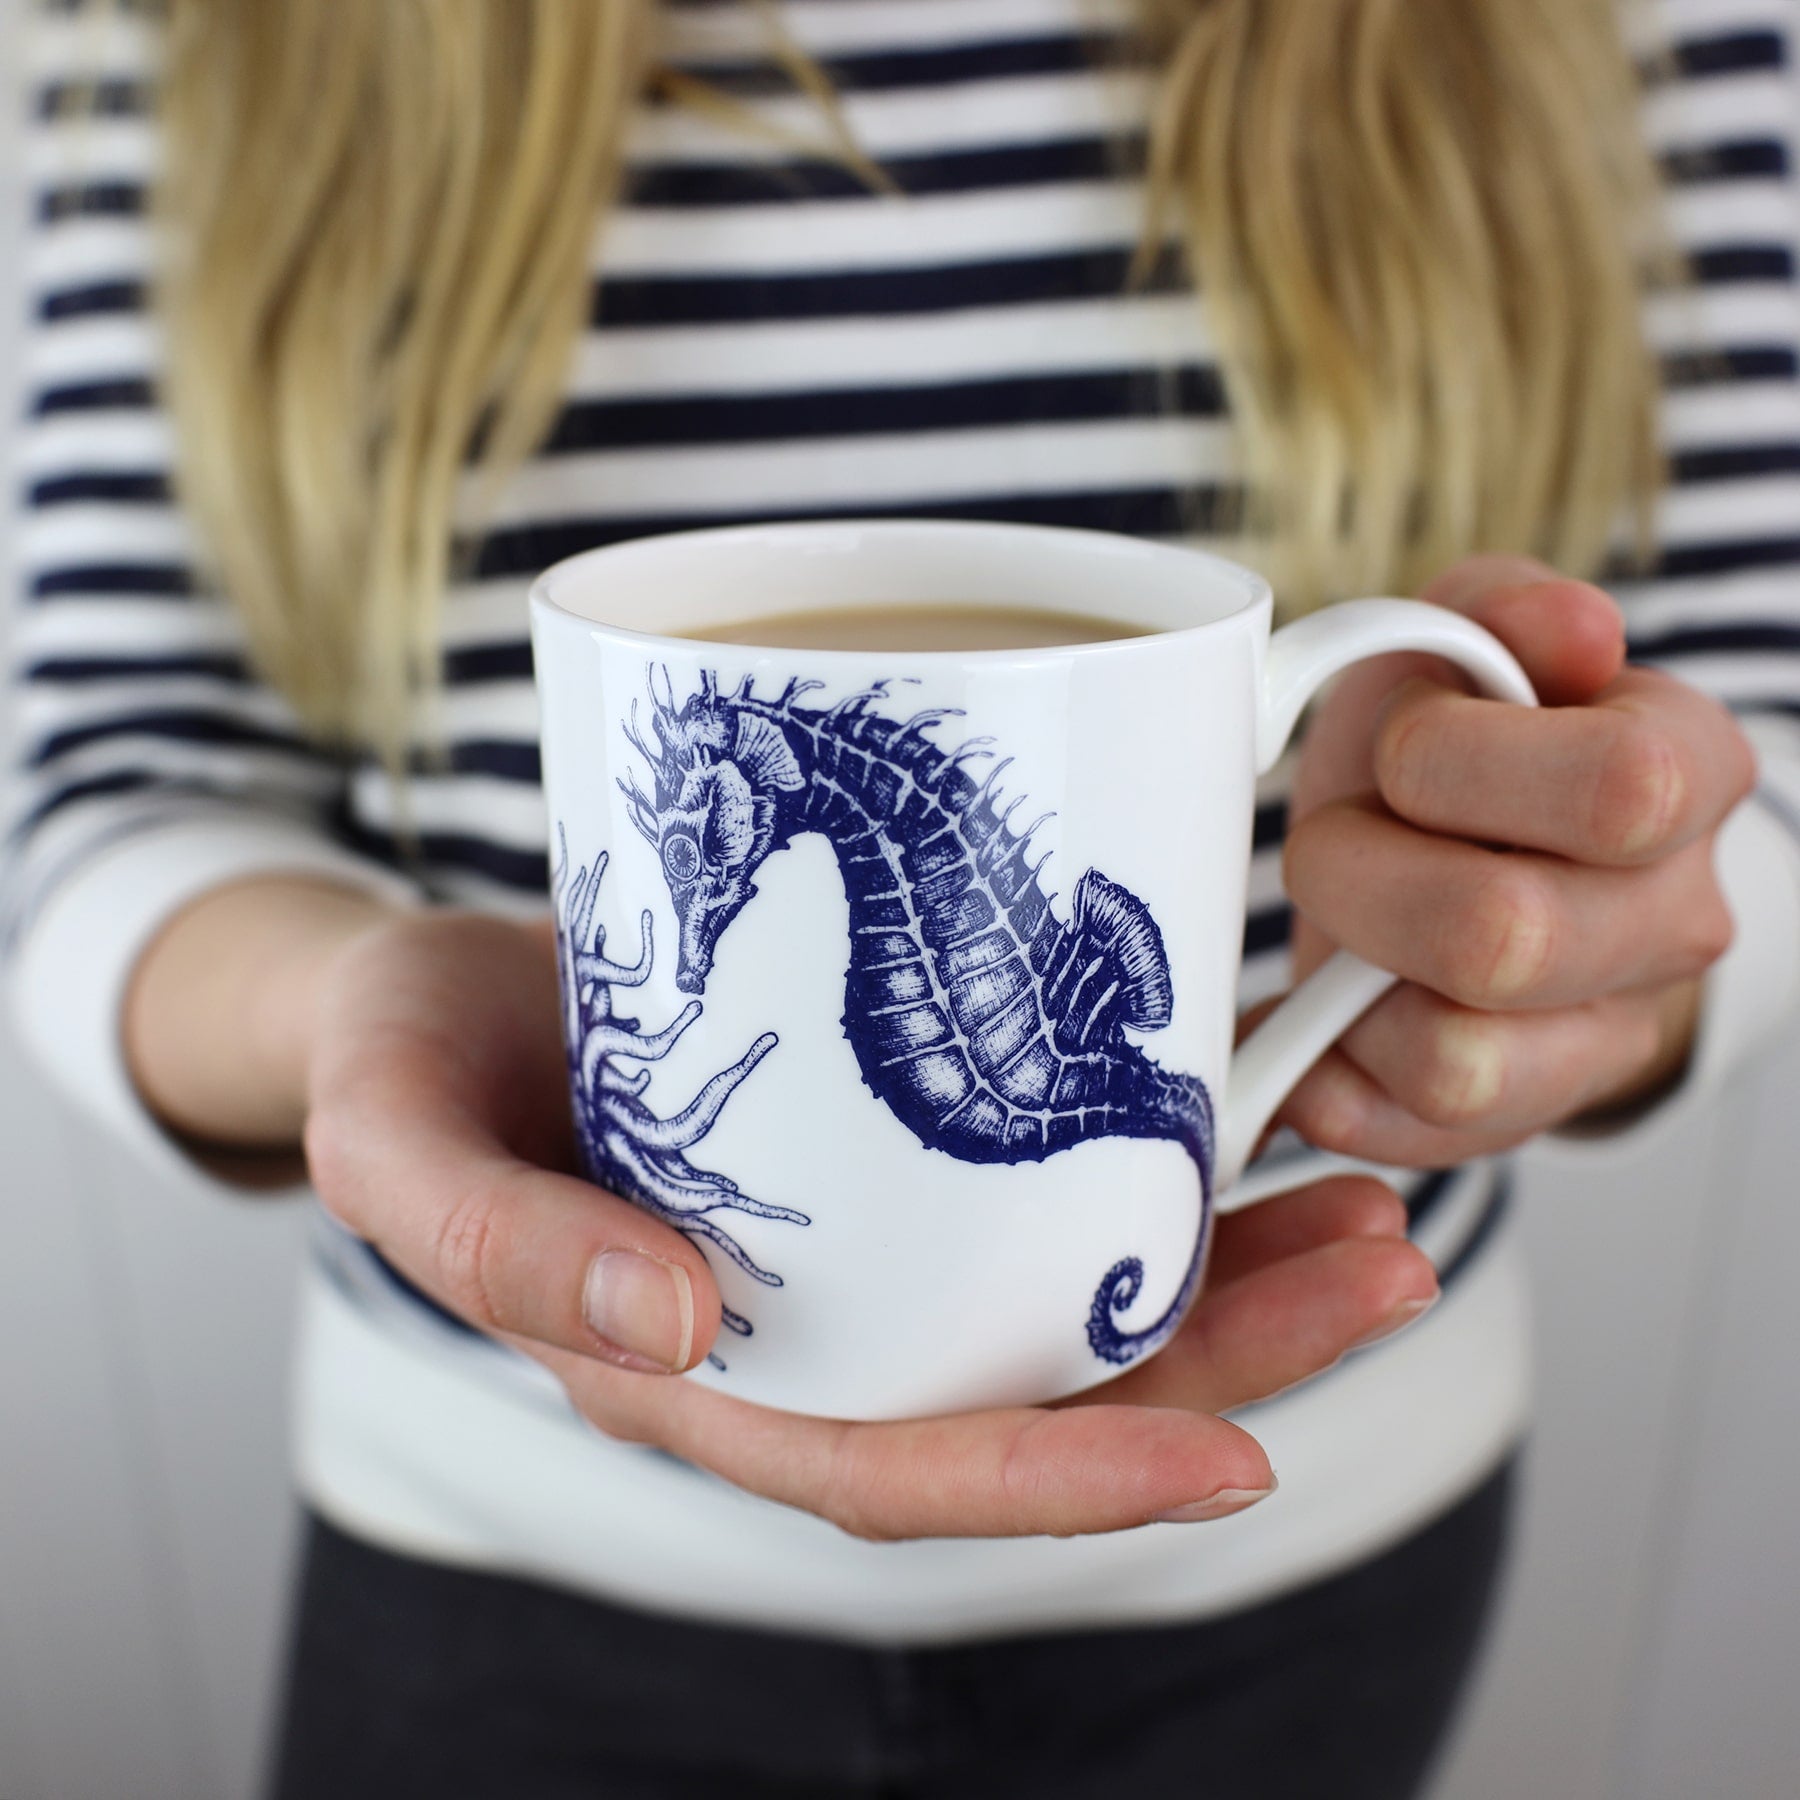 The photo shows Bone china white mug featuring hand drawn seahorse,scallop shell and anemone design in classic Navy held by a woman